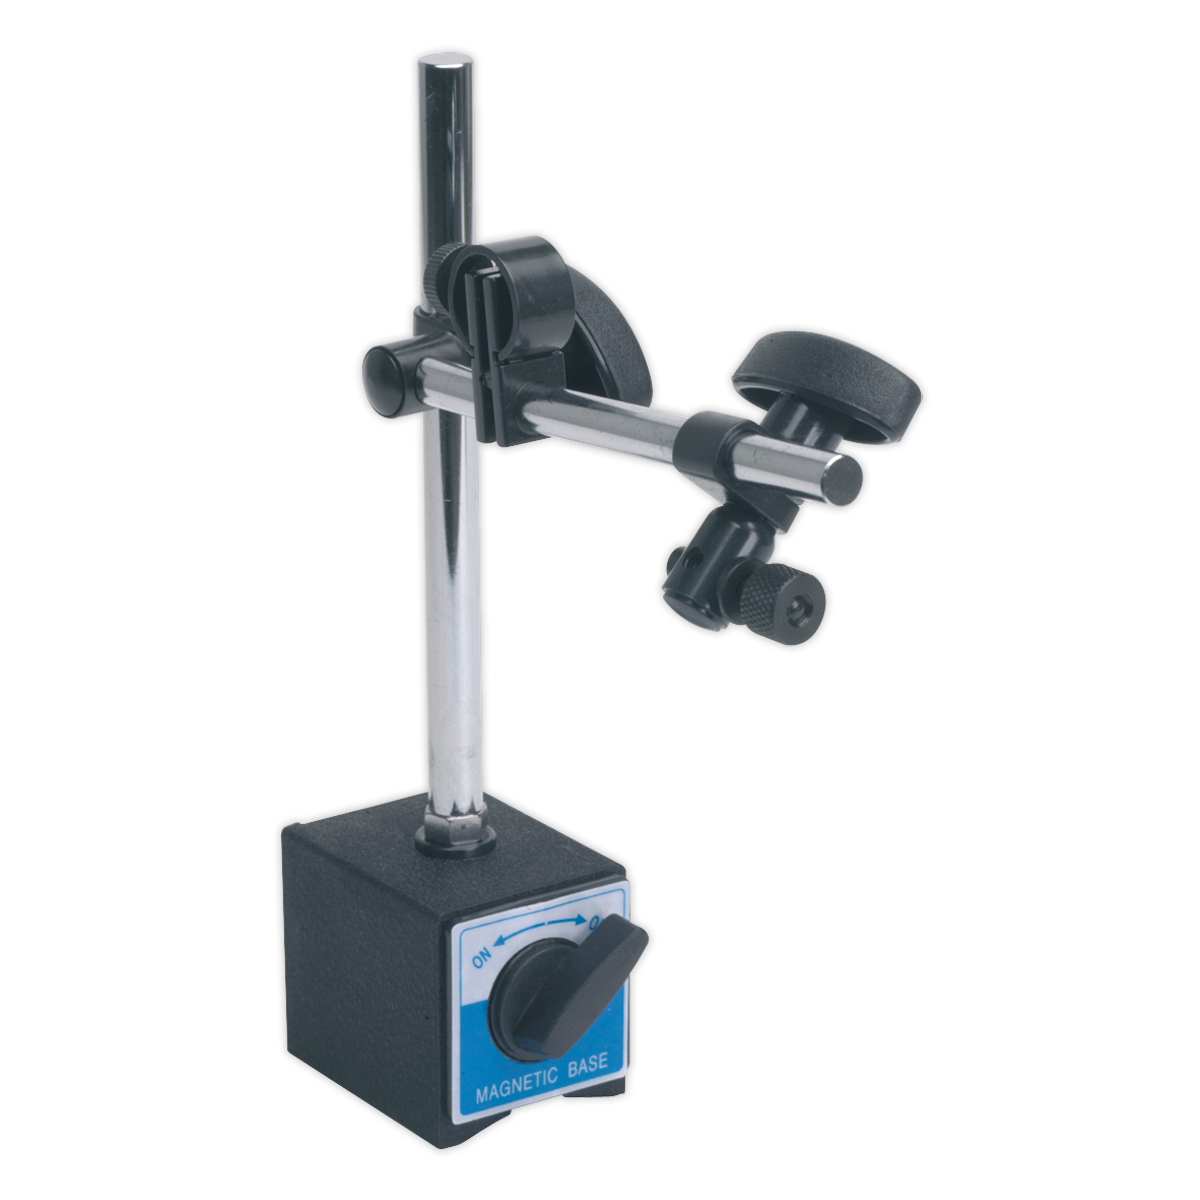 Sealey Magnetic Stand with Fine Adjustment without Indicator AK9581